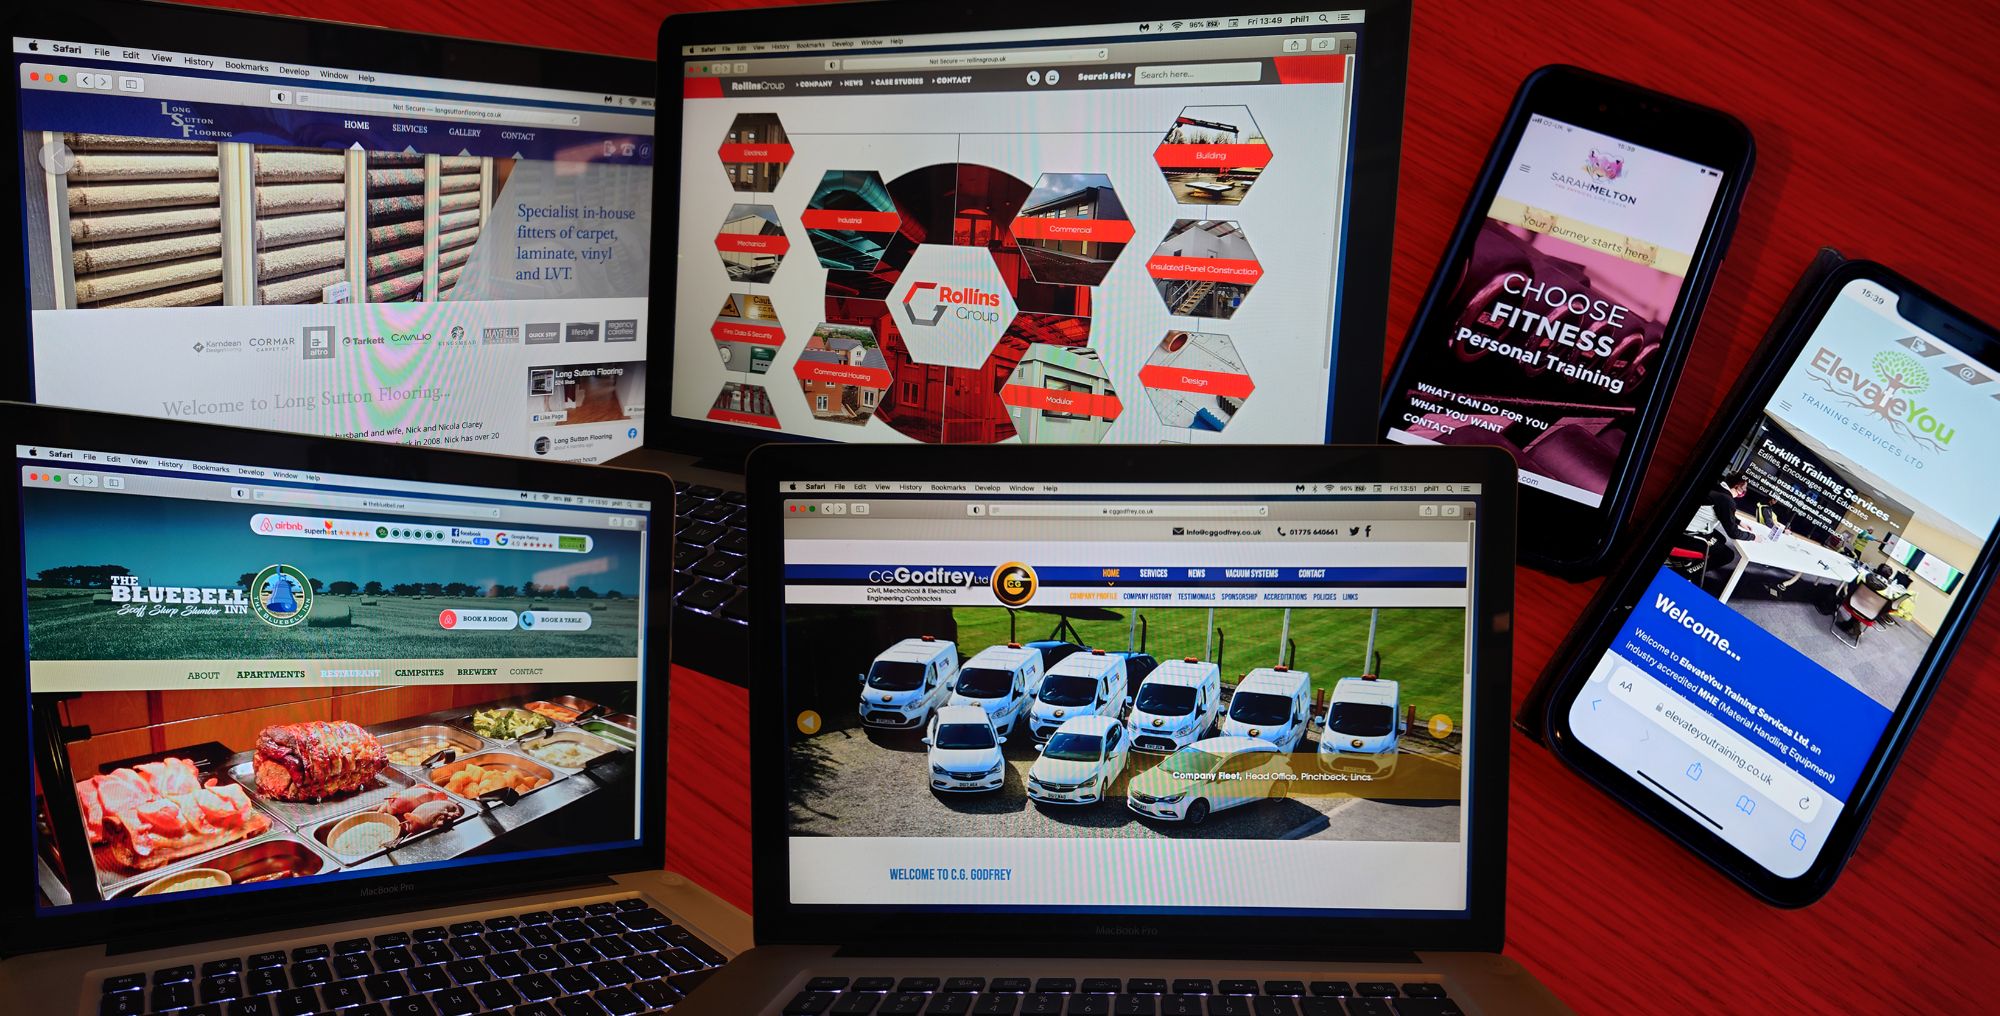 Every website we design and develop is completely bespoke